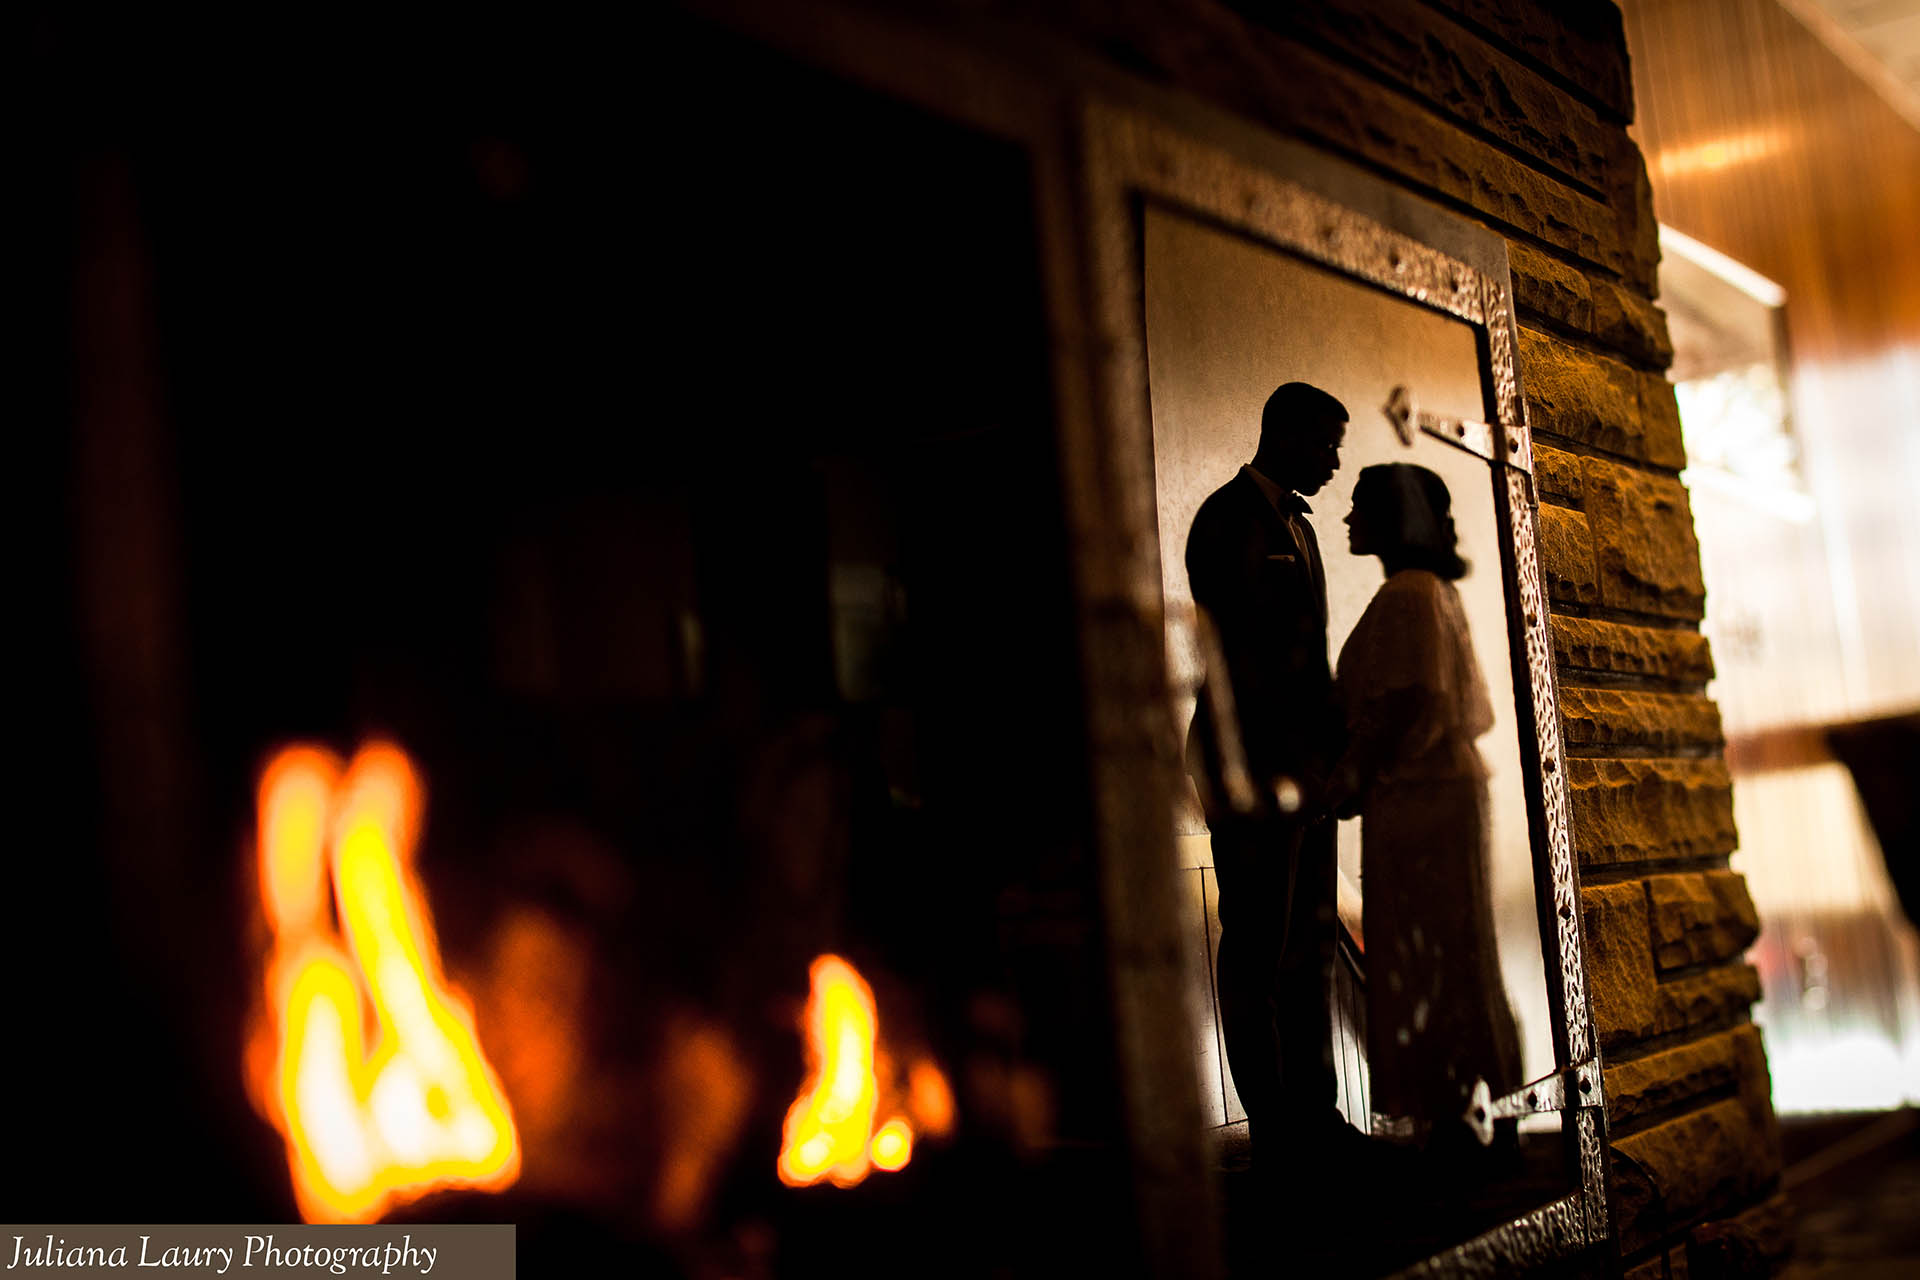 Bride and Groom reflected in fireplace glass.